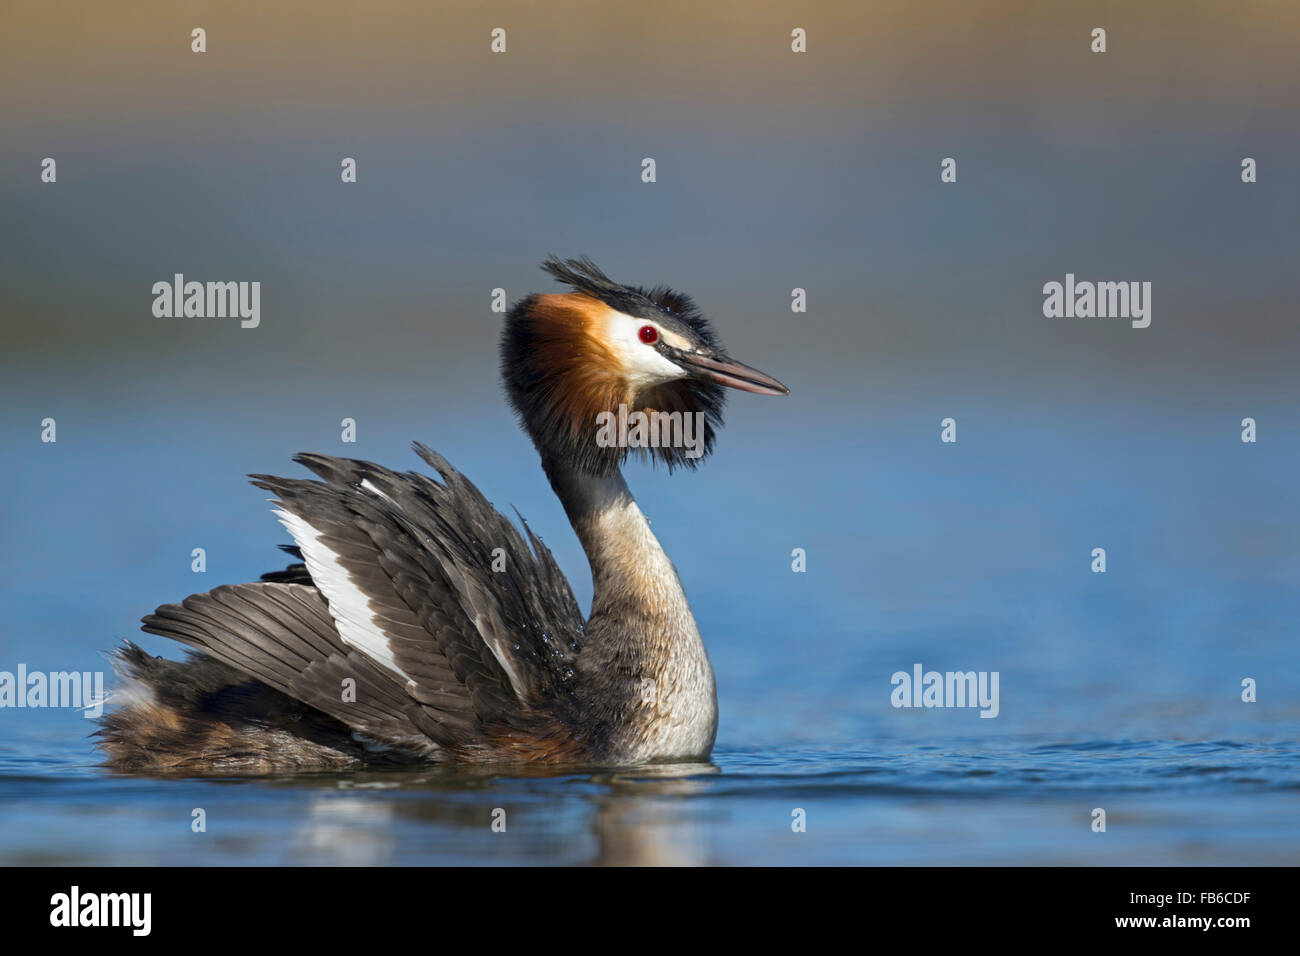 Great Crested Grebe / Haubentaucher ( Podiceps cristatus ) ruffling its feathers, half-opening its wings shows courtship display Stock Photo